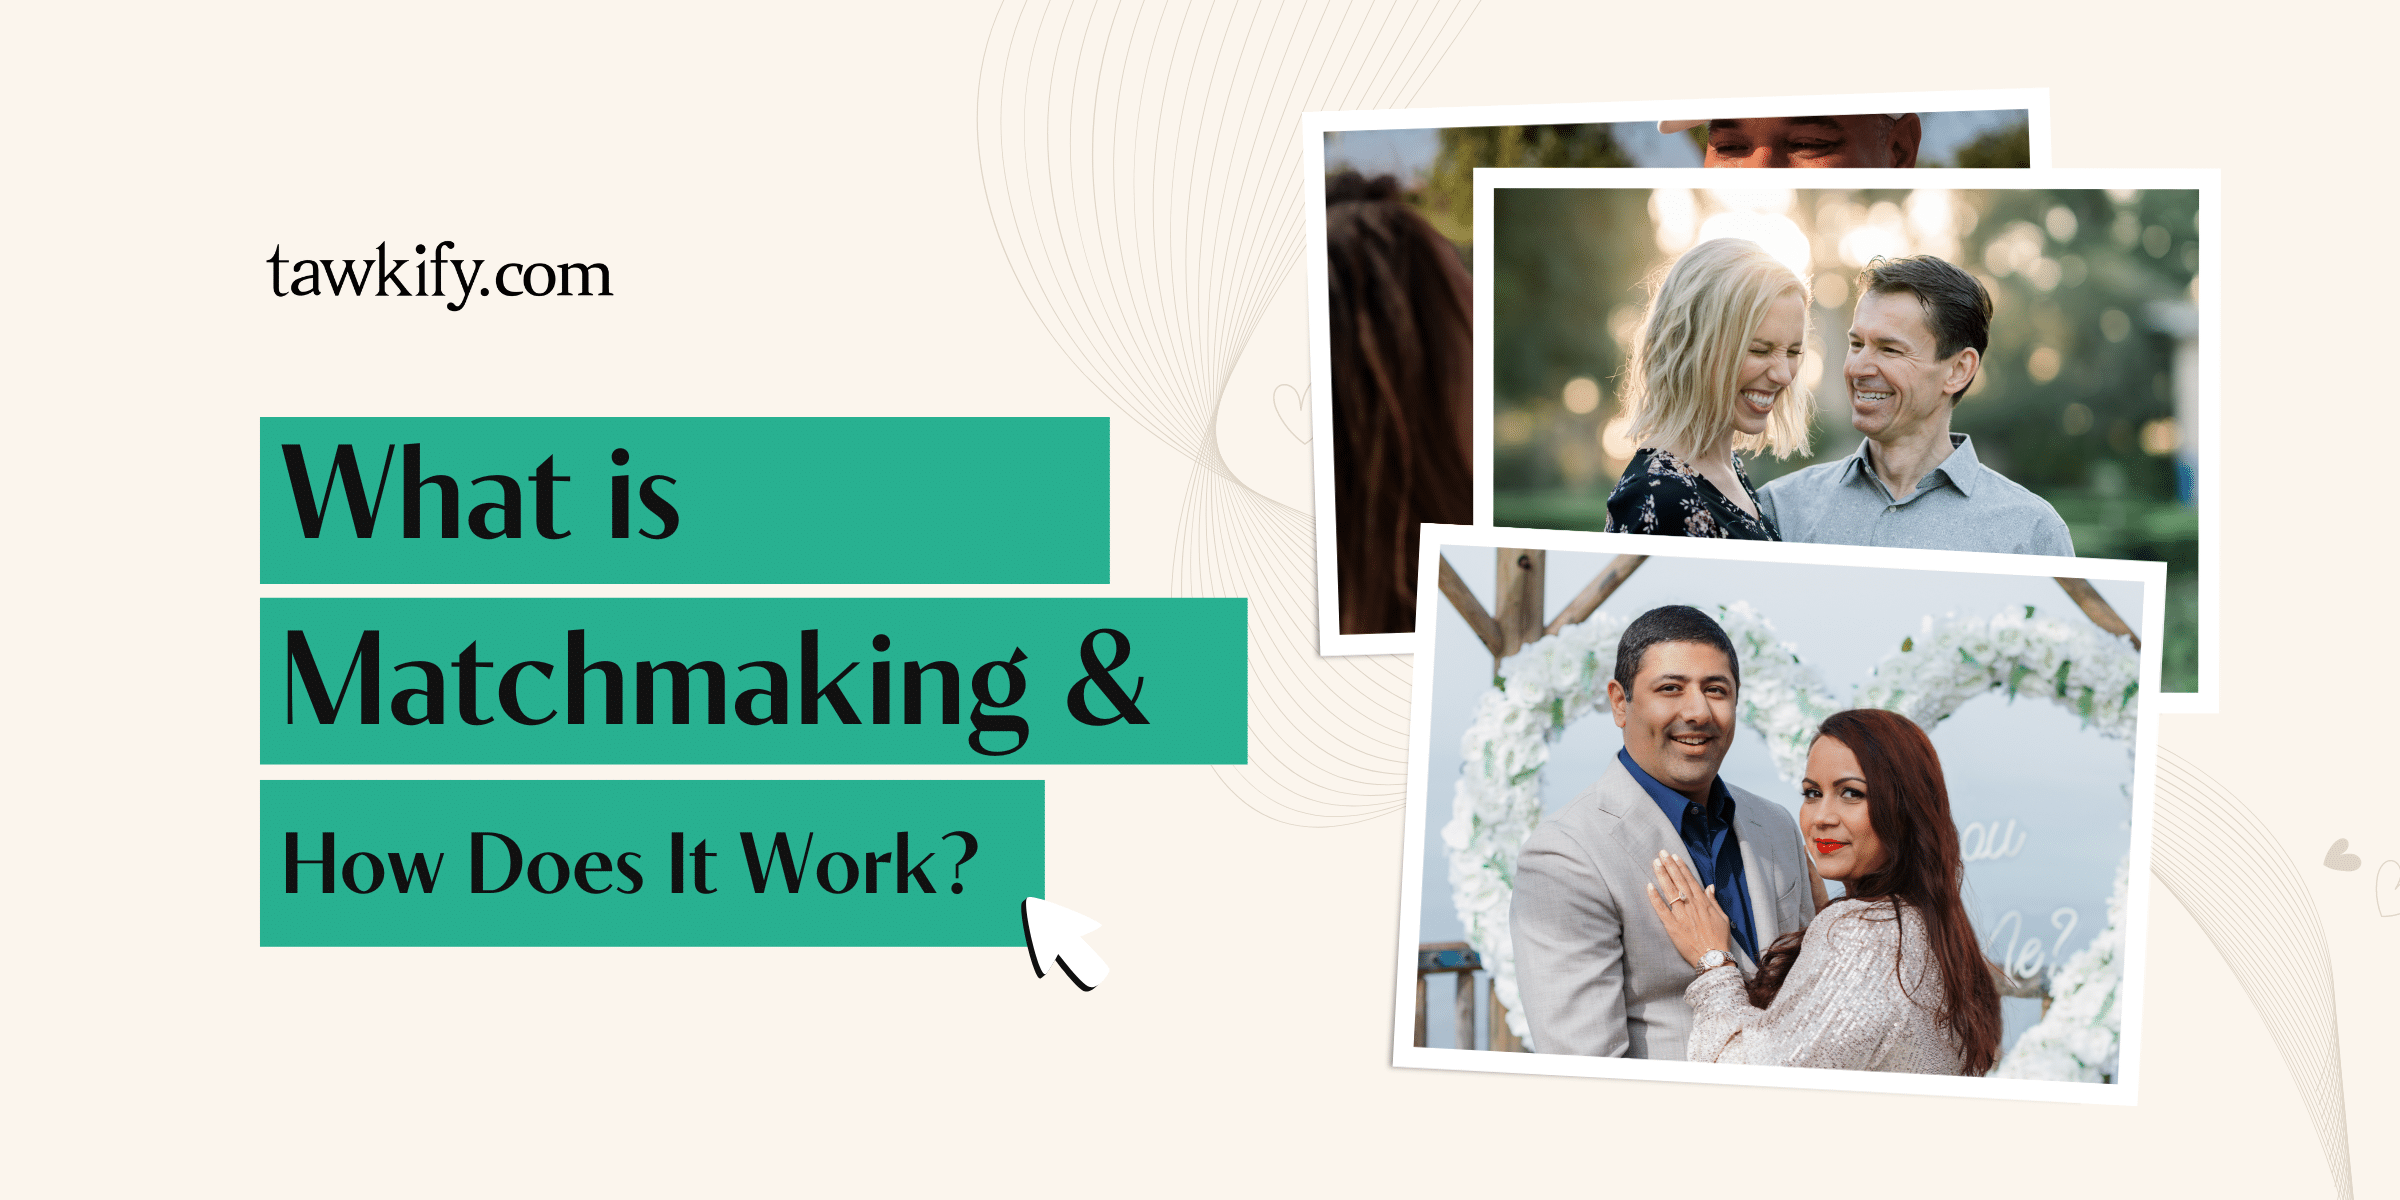 Ready for a personalized approach to finding love? Explore matchmaking with Tawkify and start your journey to true connection.